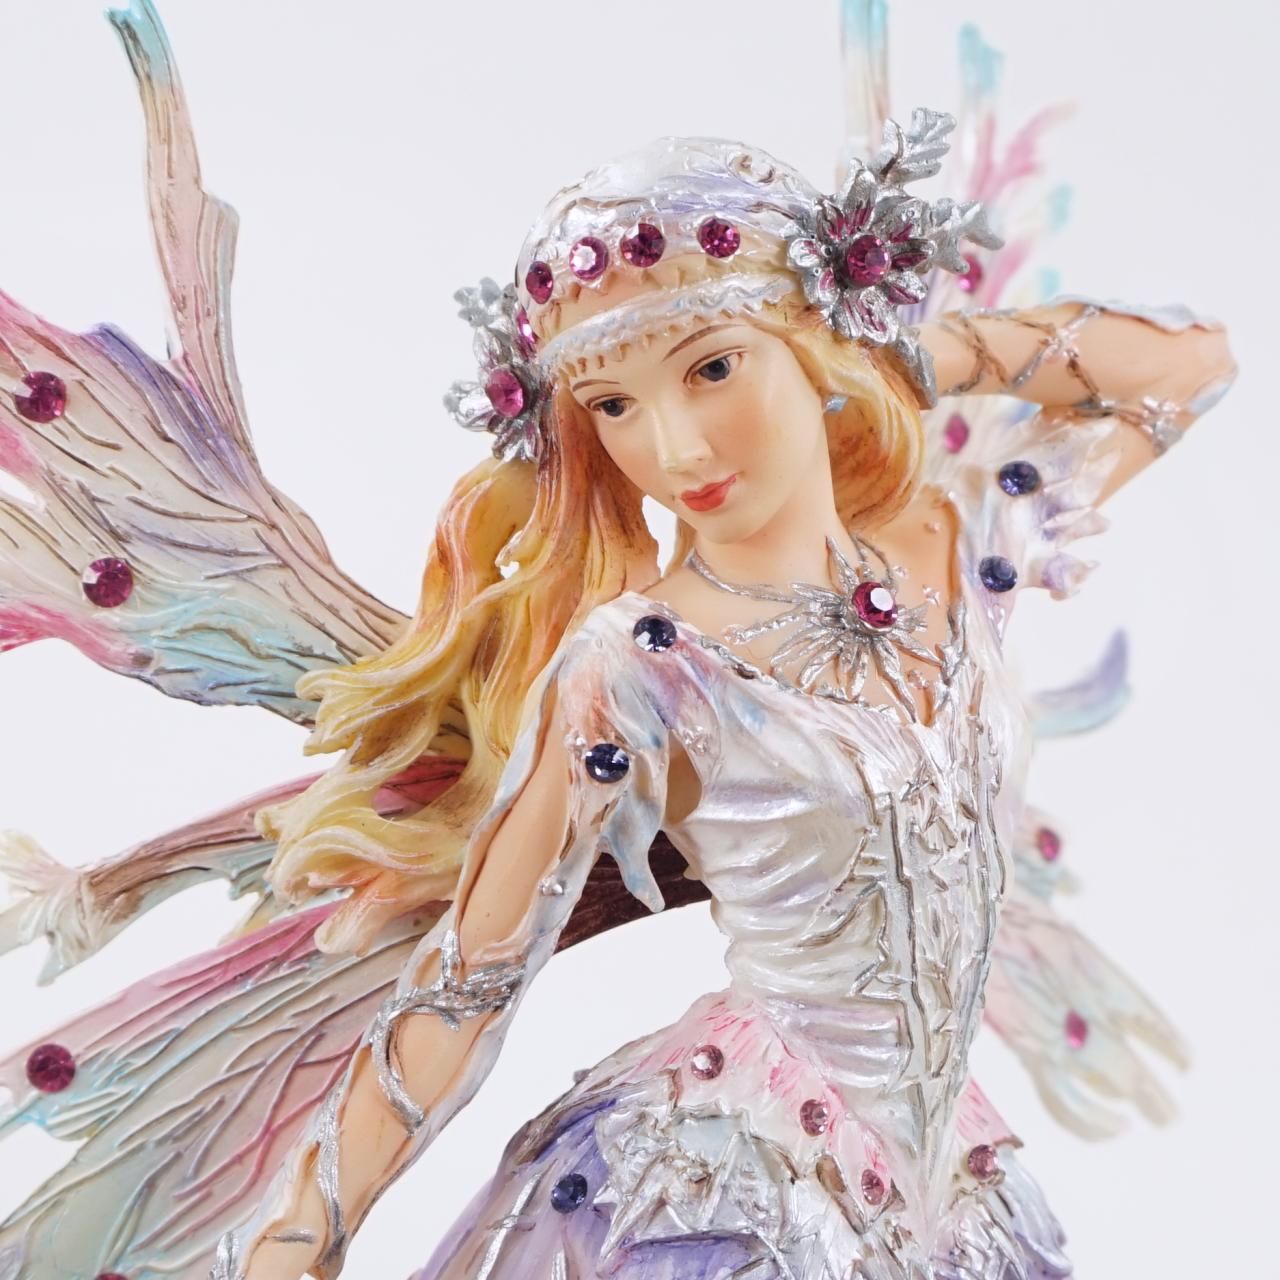 Crisalis Collection★ Ice Princess Faerie (2-5385) 10% OFF